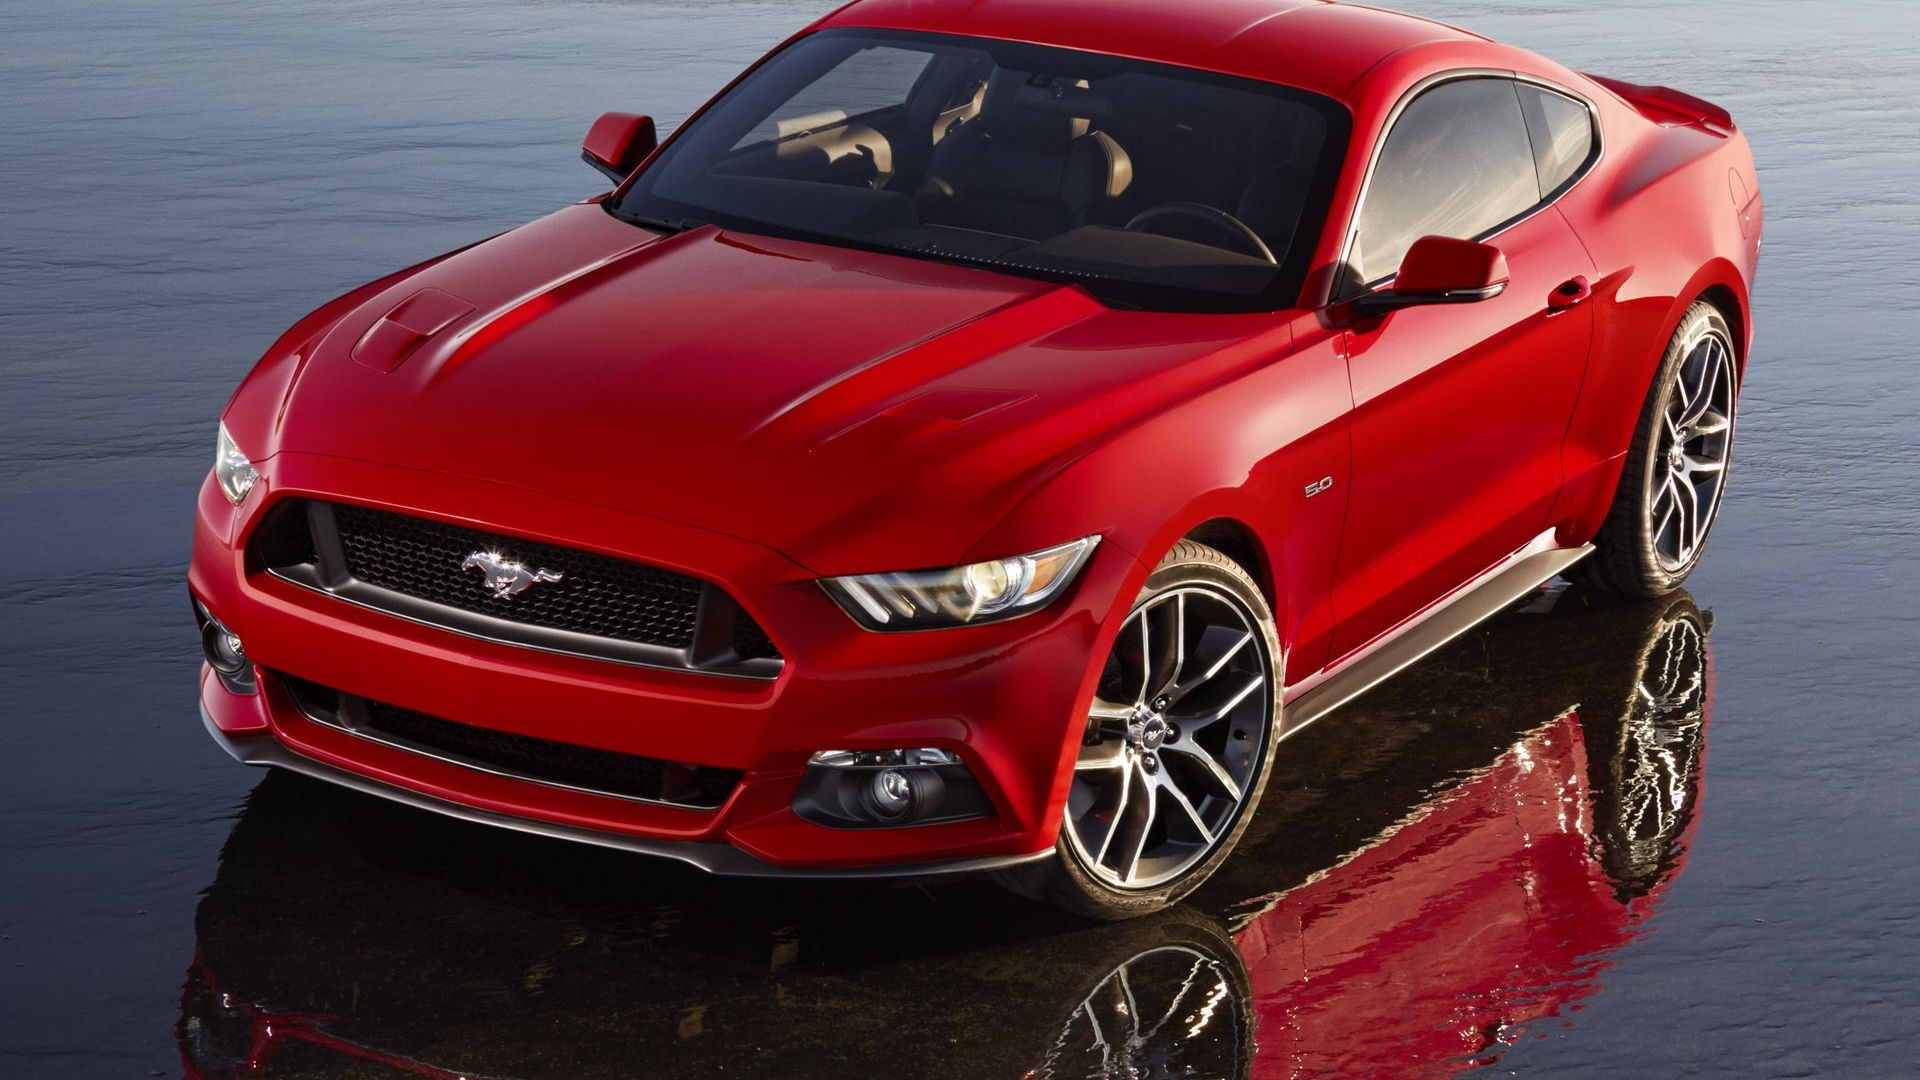 2015 Ford Mustang via USA Today leak